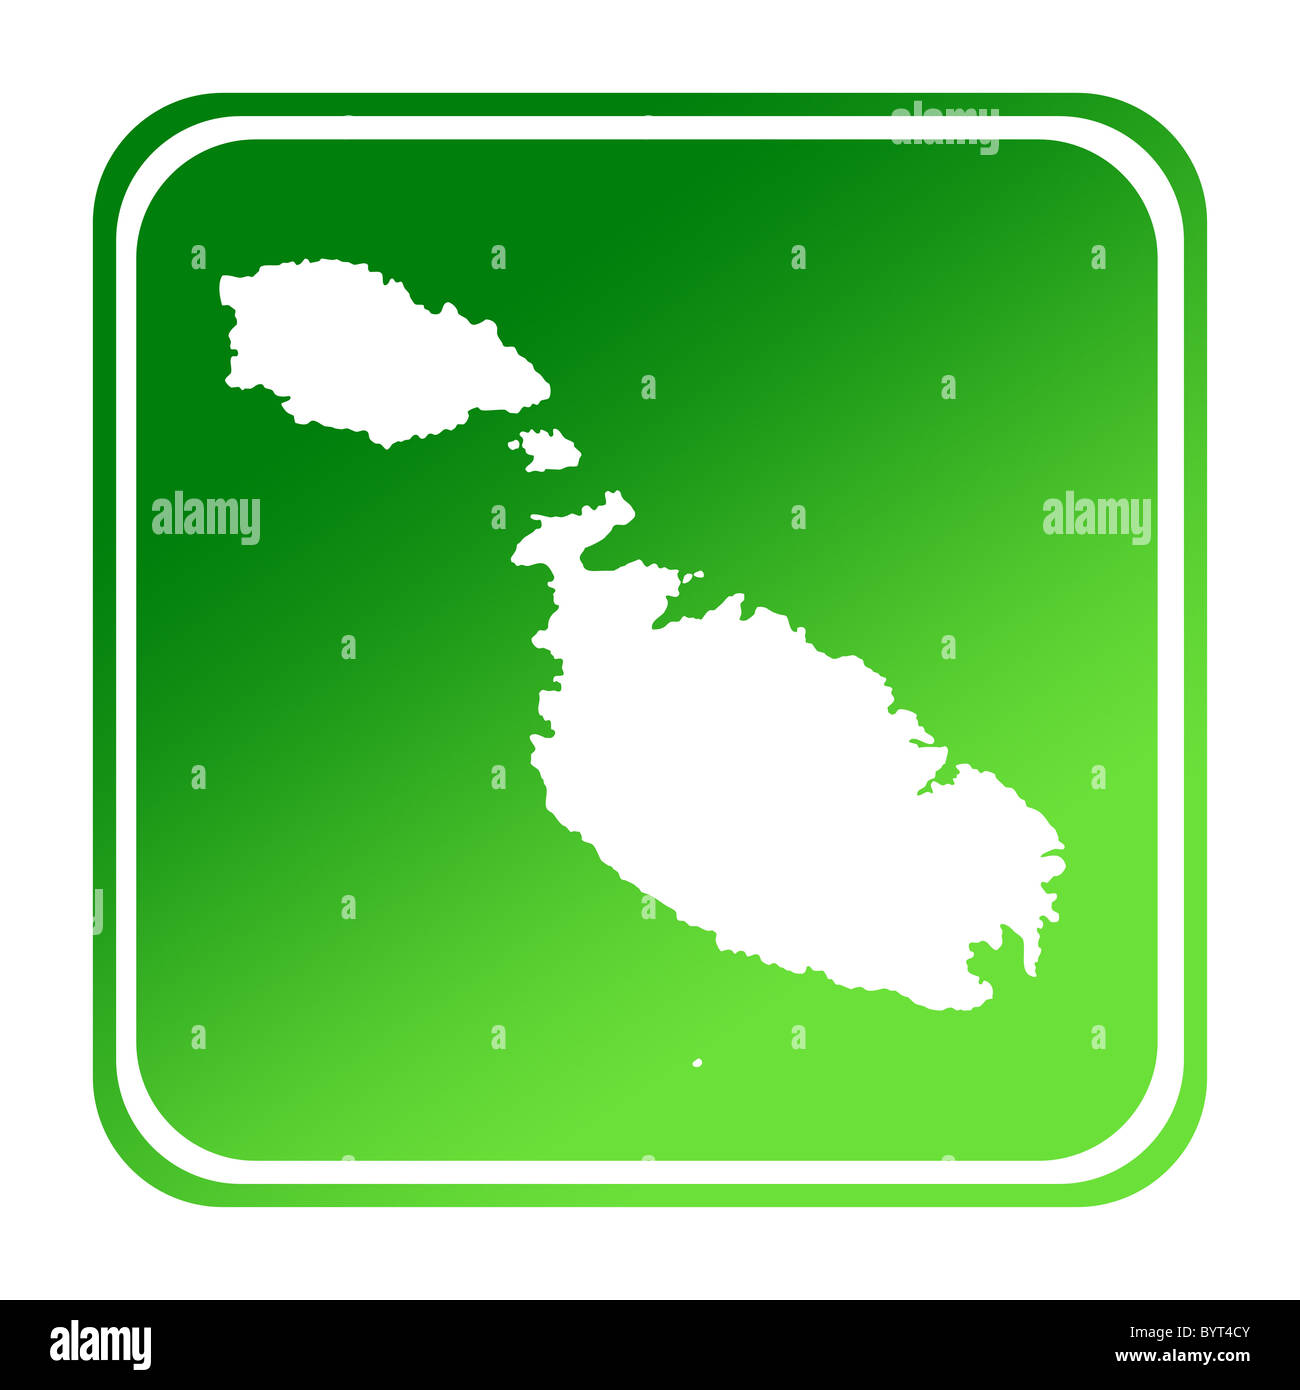 Malta map button in gradient green; isolated on white background with clipping path. Stock Photo